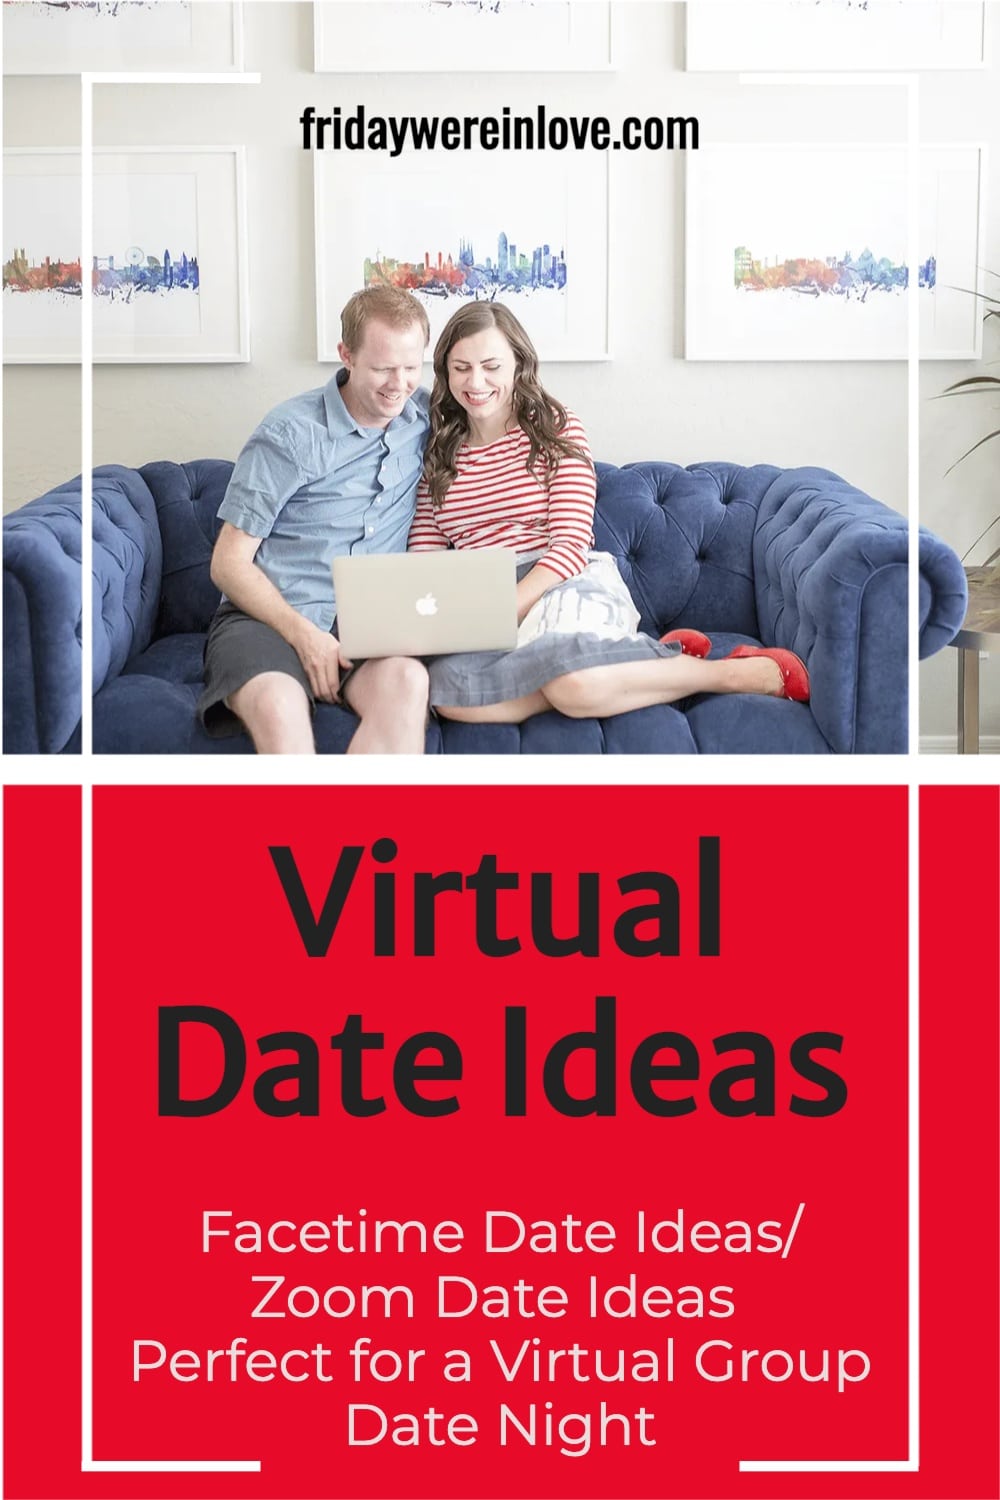 Virtual date ideas couples can do online. 